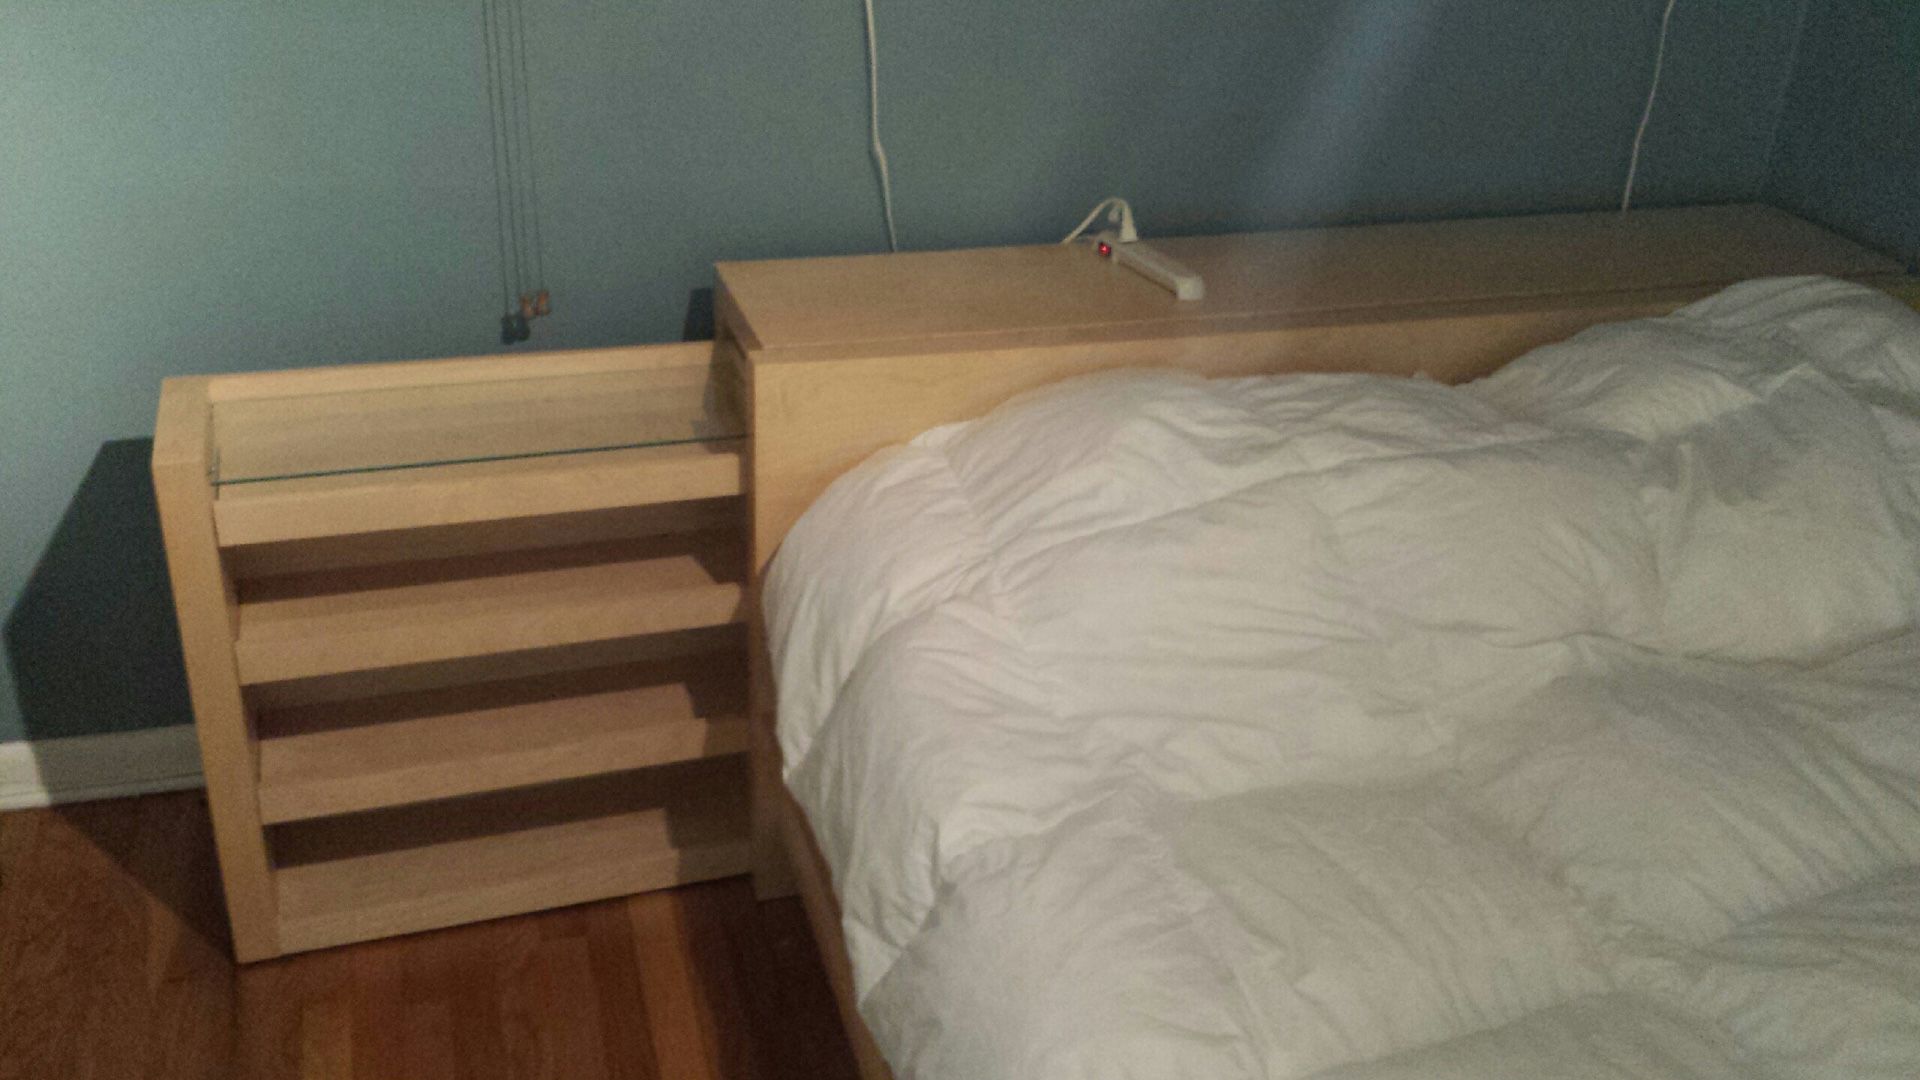 IKEA queen size bed with roll out shelves